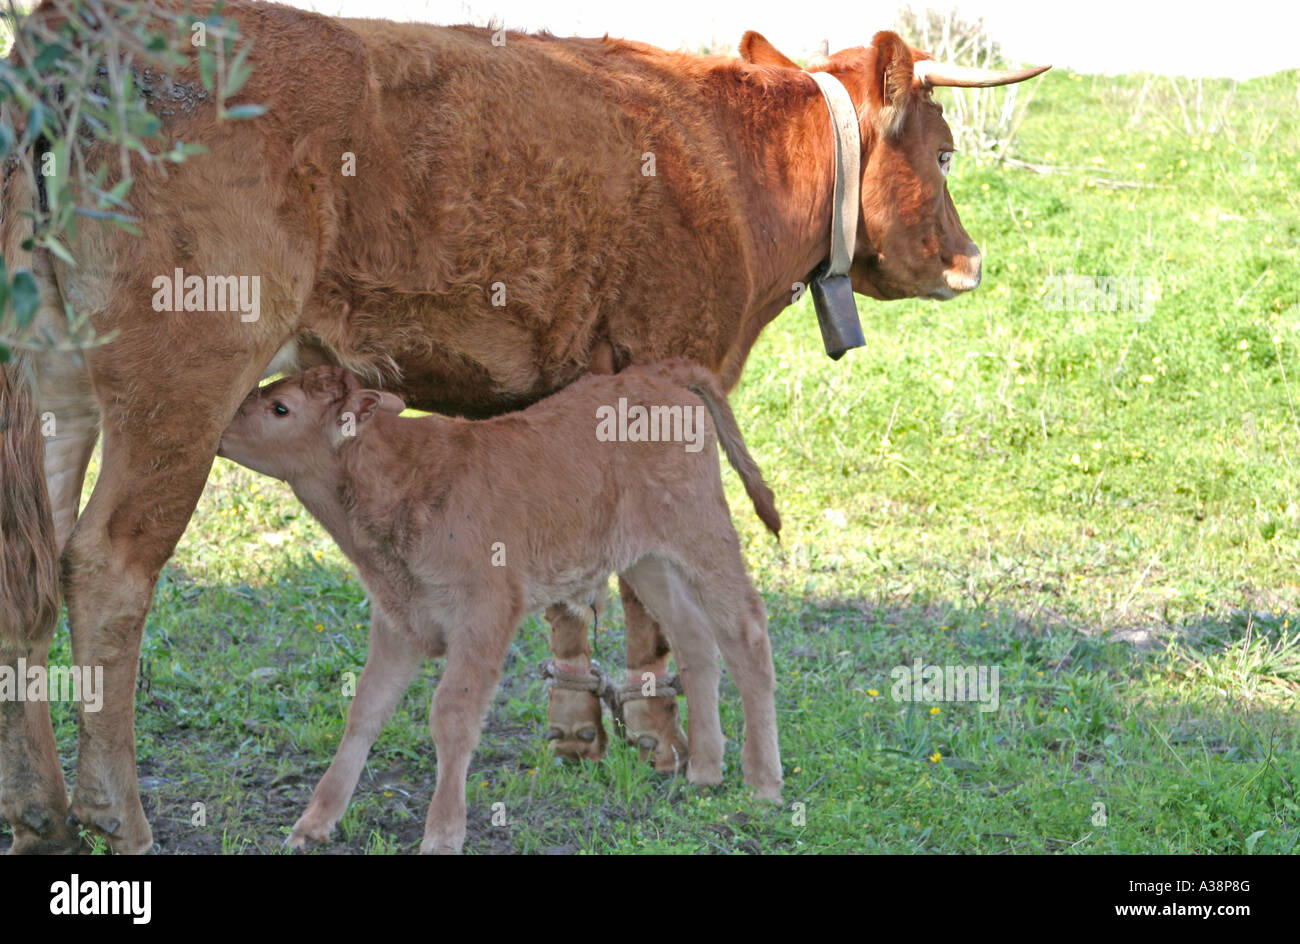 Calf drinking from its mother with hobbled feet legs tied together Algarve Portugal Europe Stock Photo